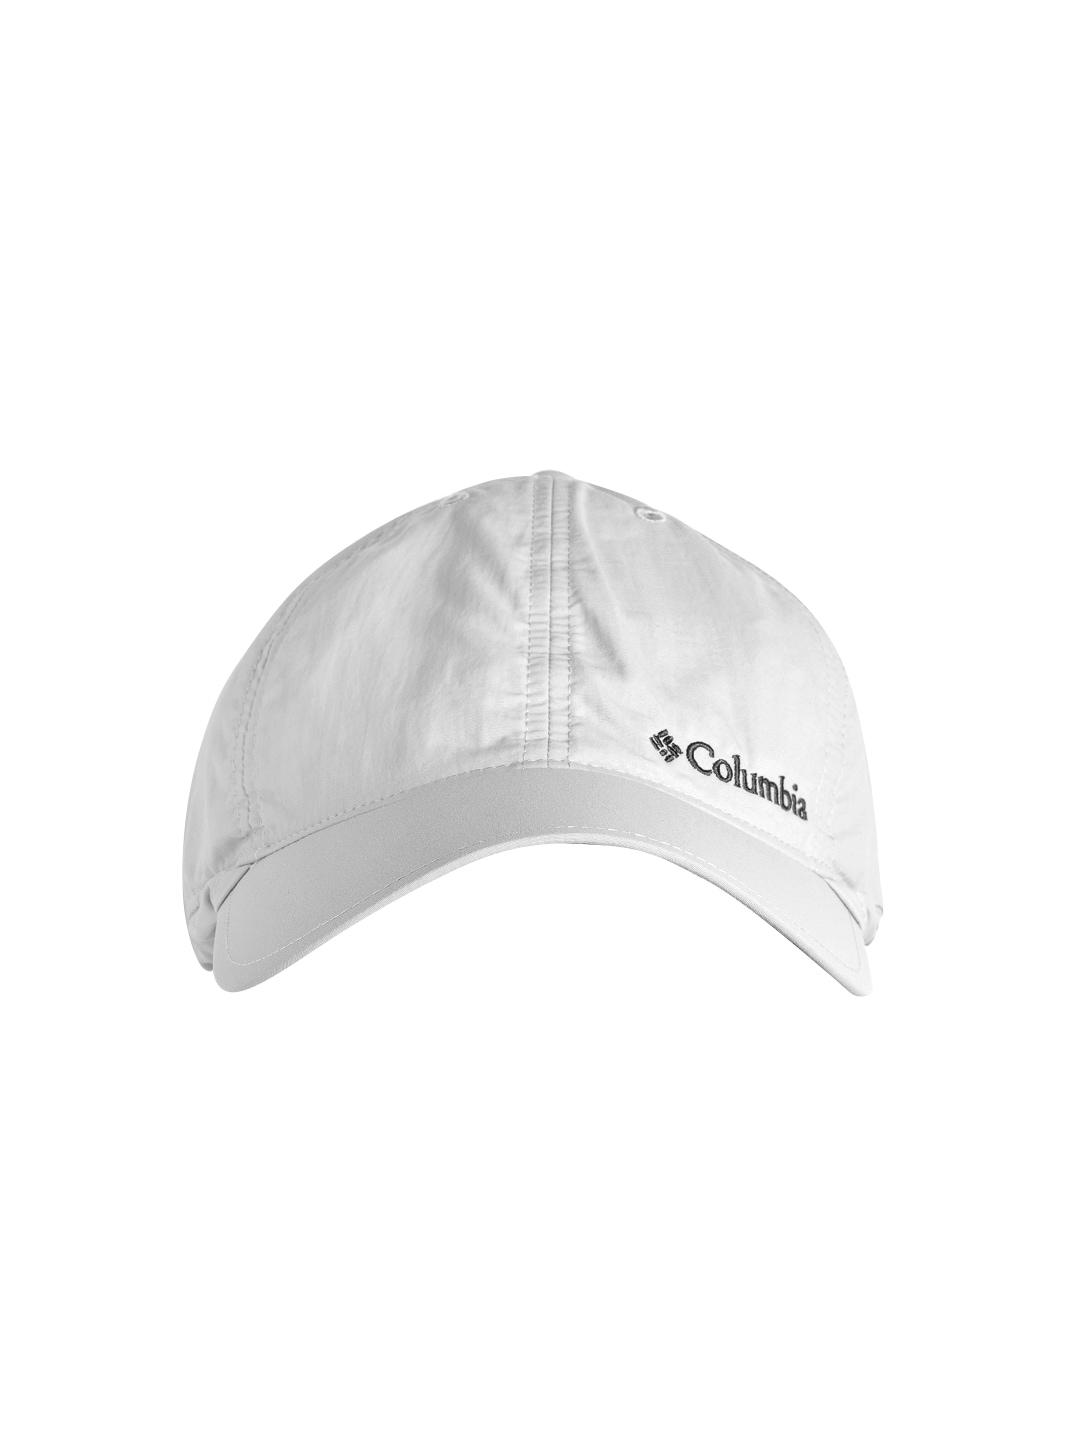 columbia unisex grey & charcoal brand logo embroidered baseball cap with ear flap